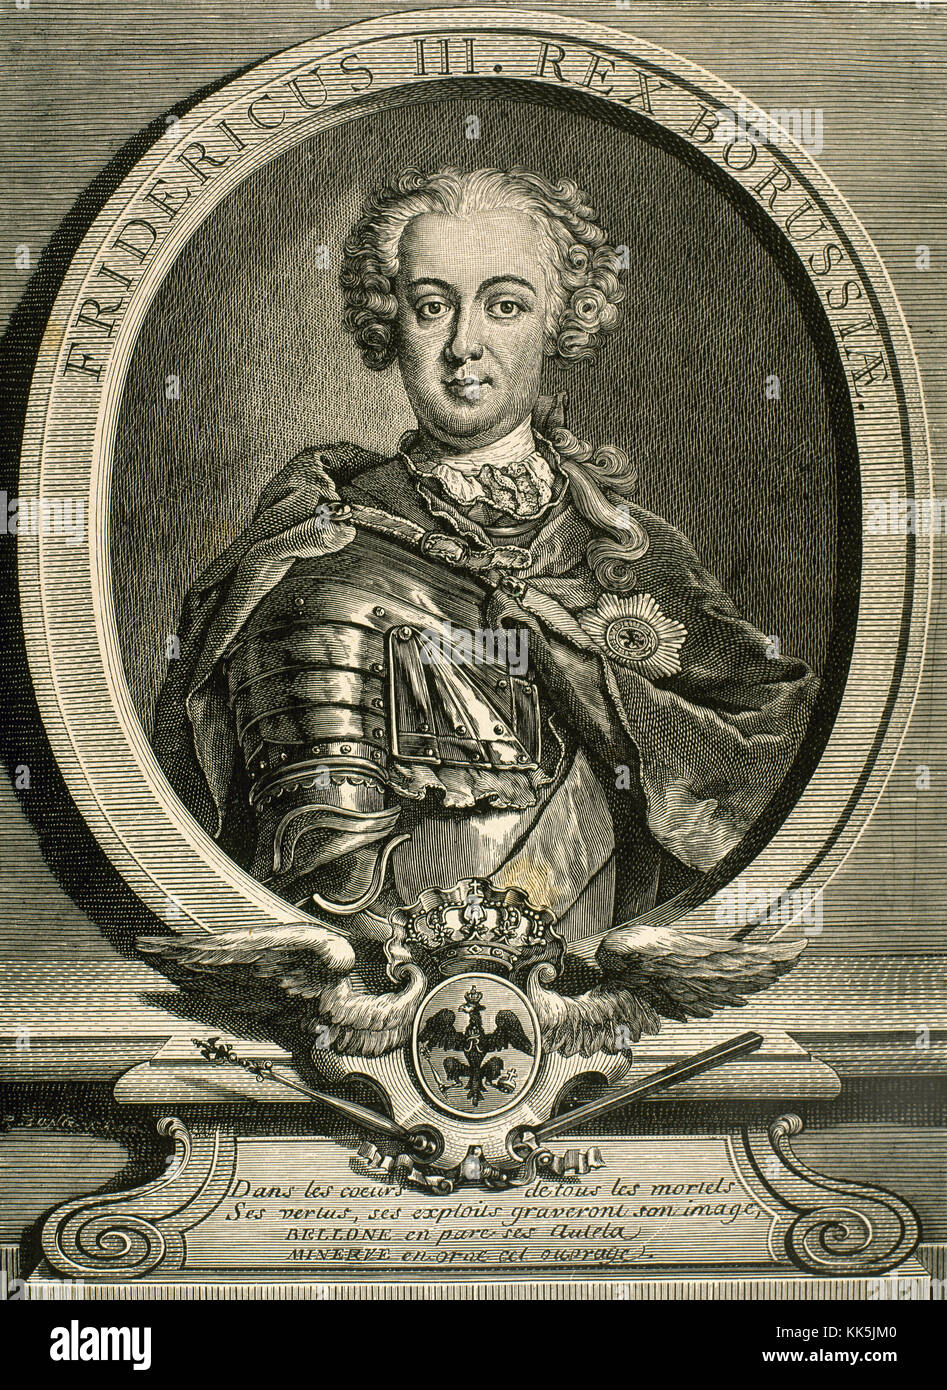 Frederick II the Great (1712-1786).  King of Prusian and Elector of Brandenburg. House of Hohenzolern. Portrait. Engraving by R. Bong. 19th century. Stock Photo